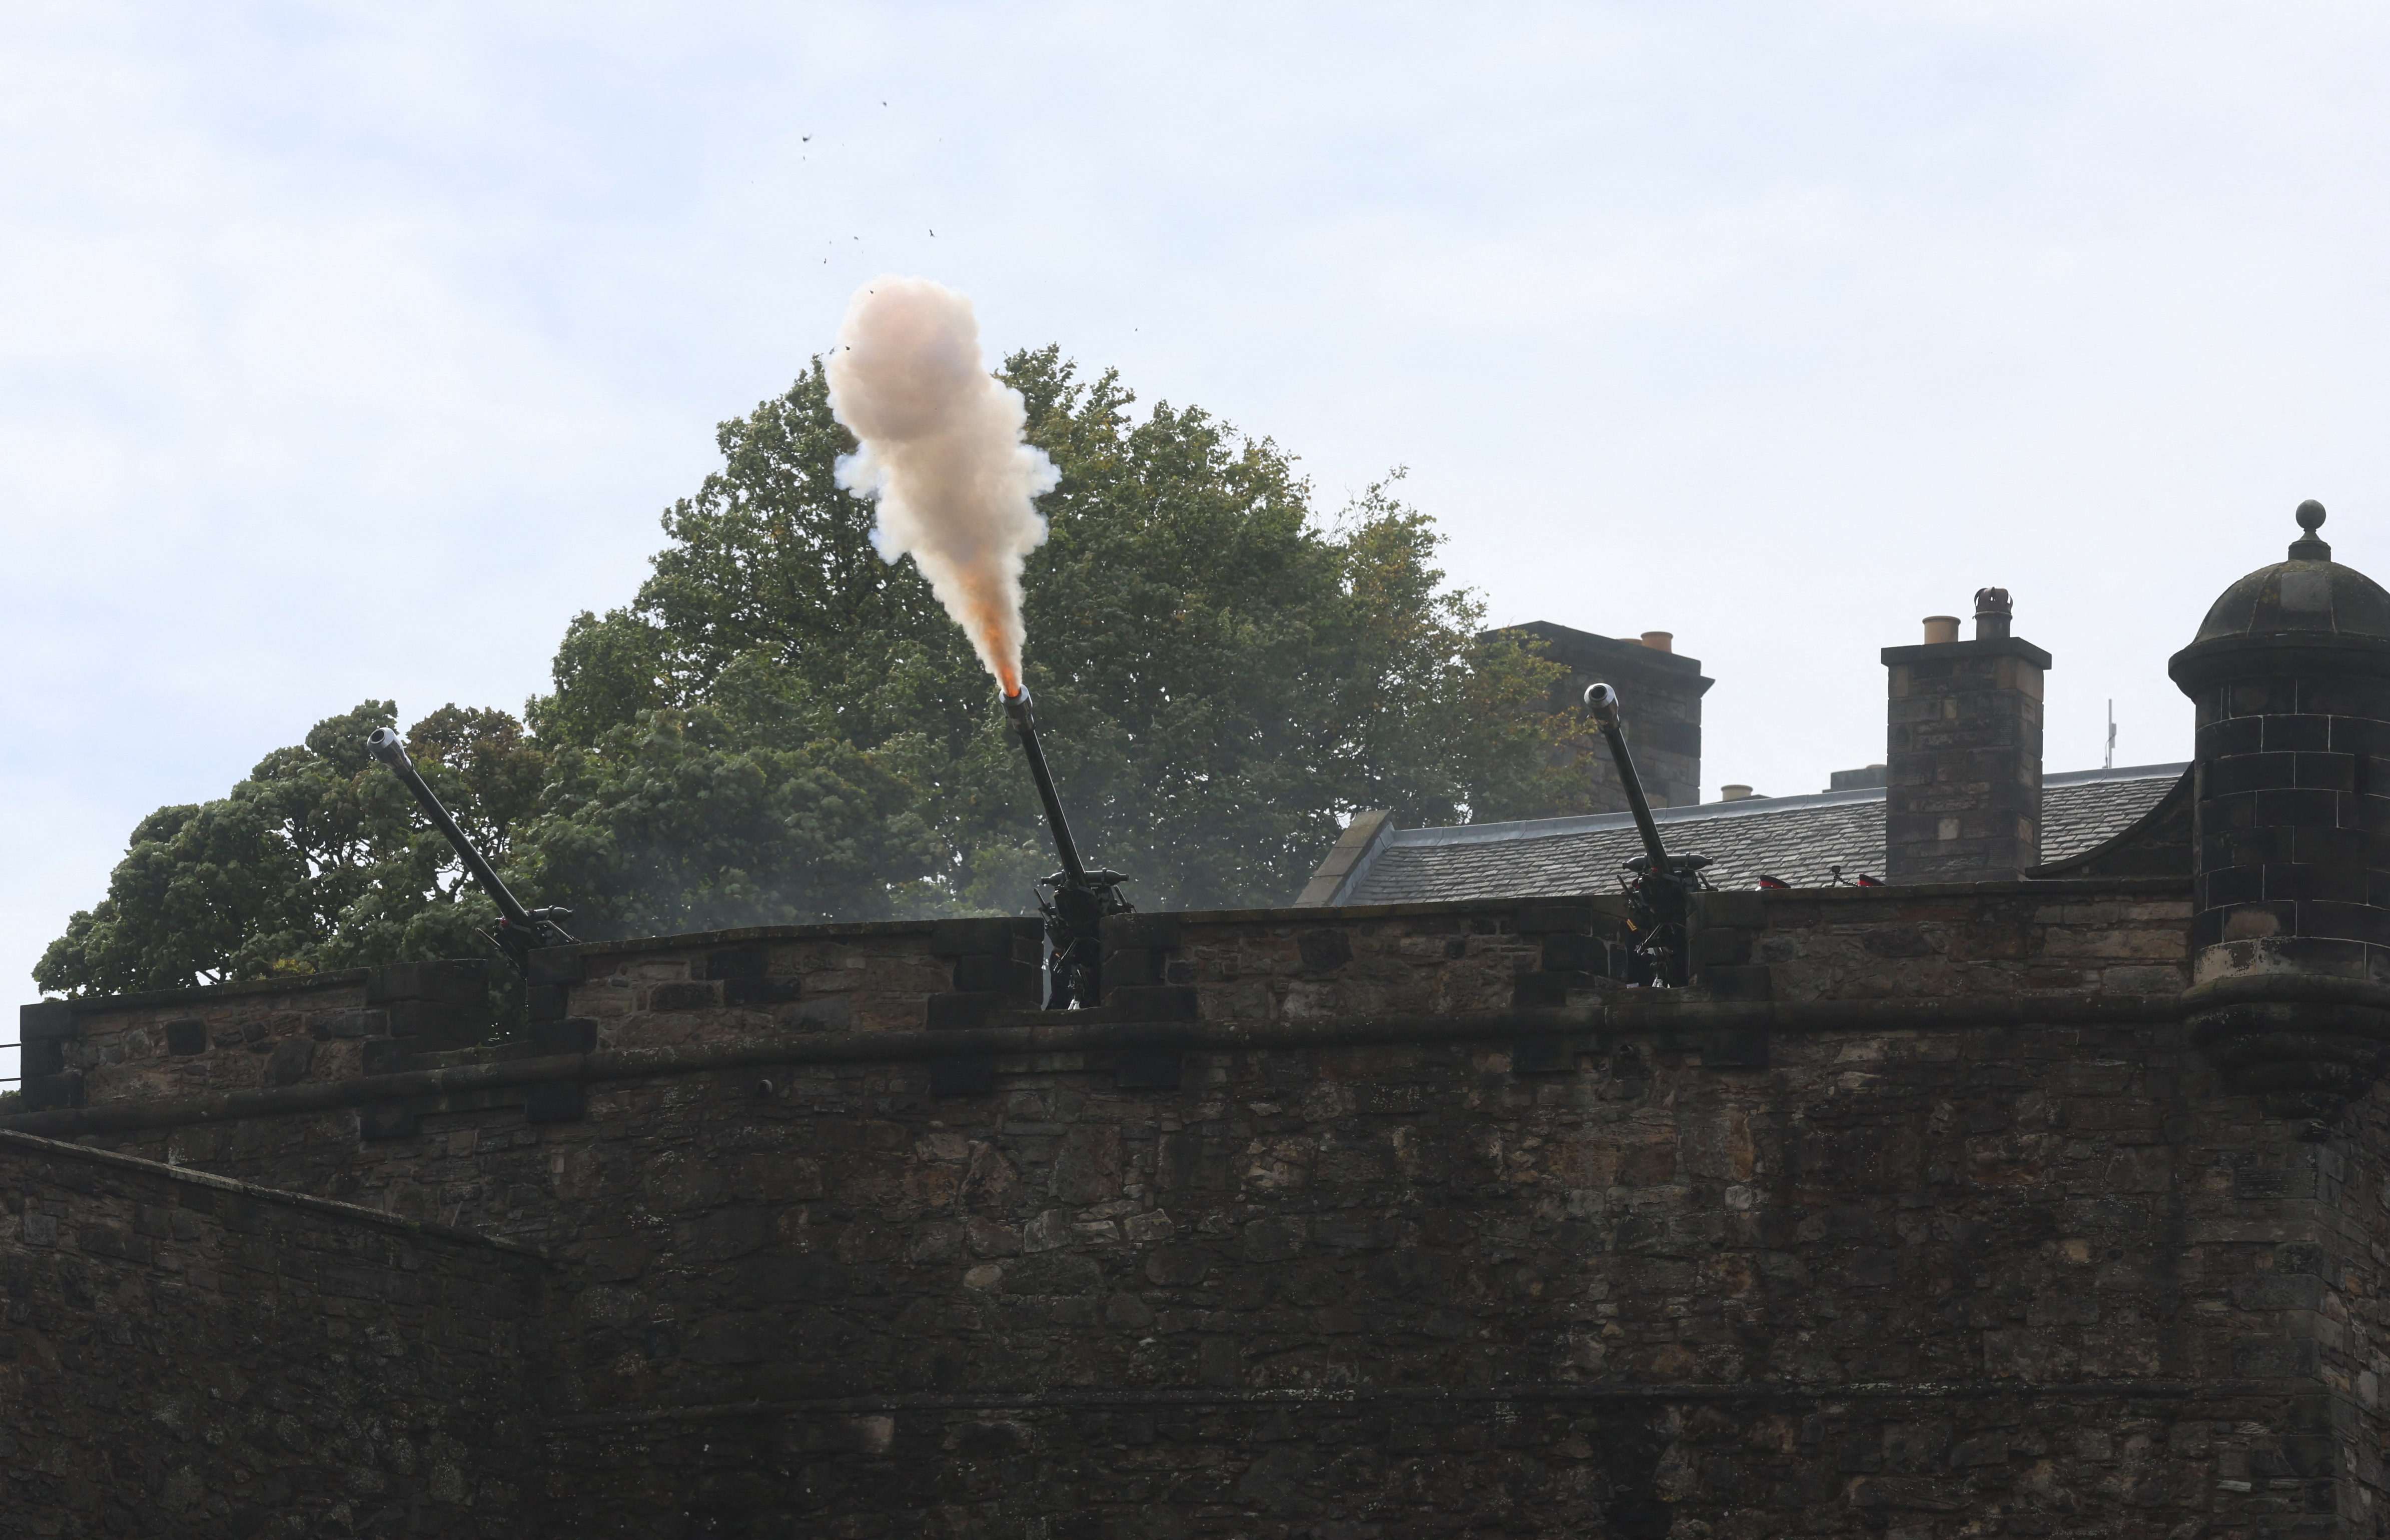 A cannon salvo is fired in Edinburgh (REUTERS/Lee Smith)